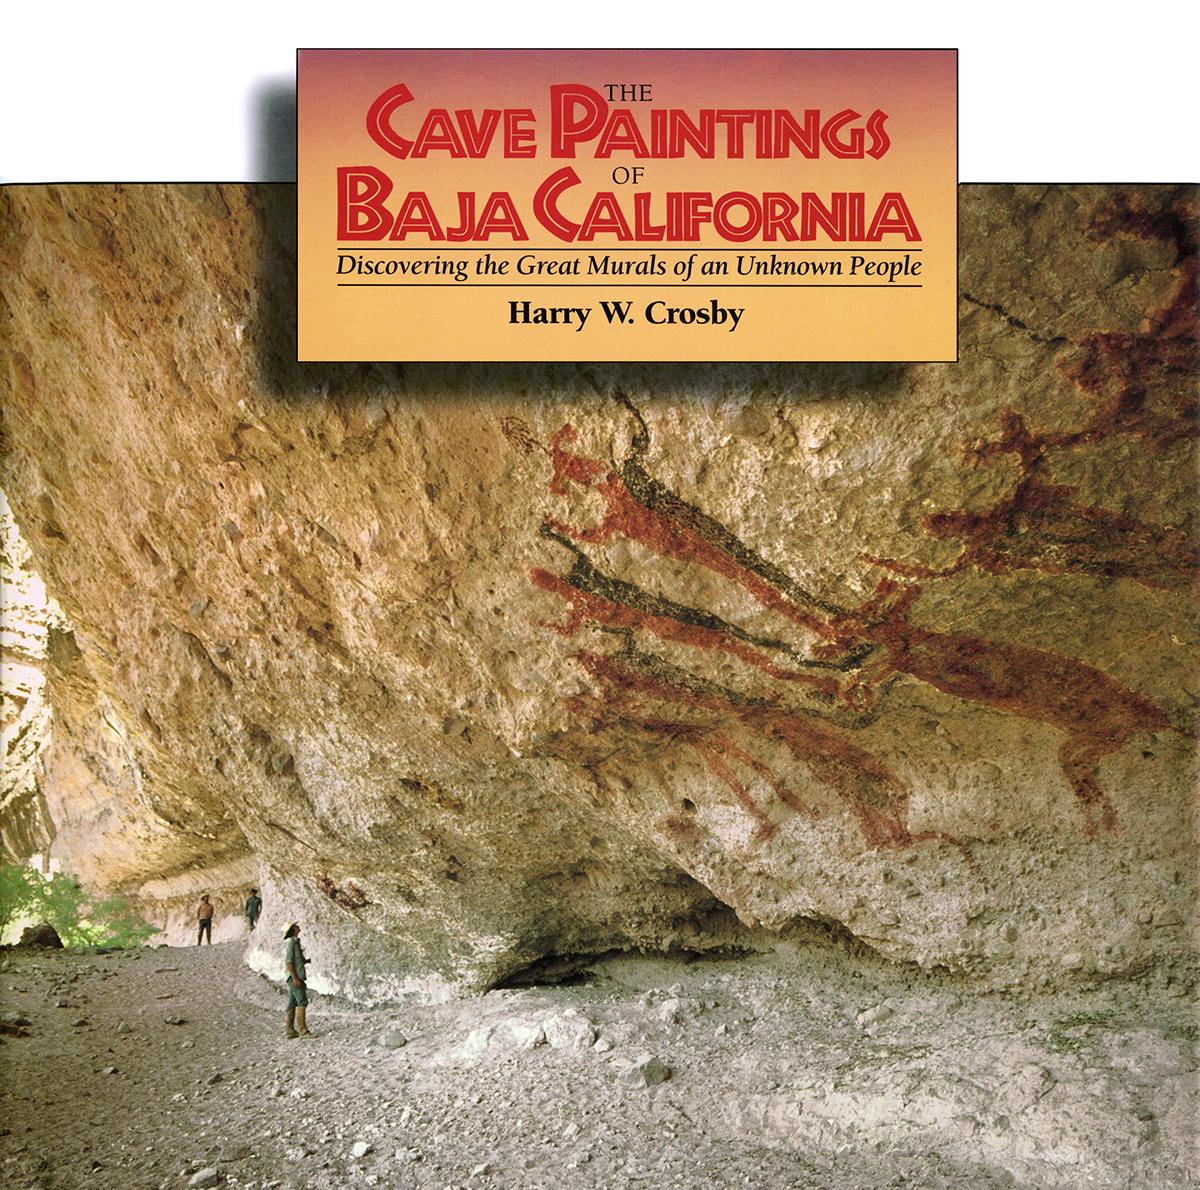 The Cave Paintings of Baja California: Discovering the Great Murals of an Unknown People